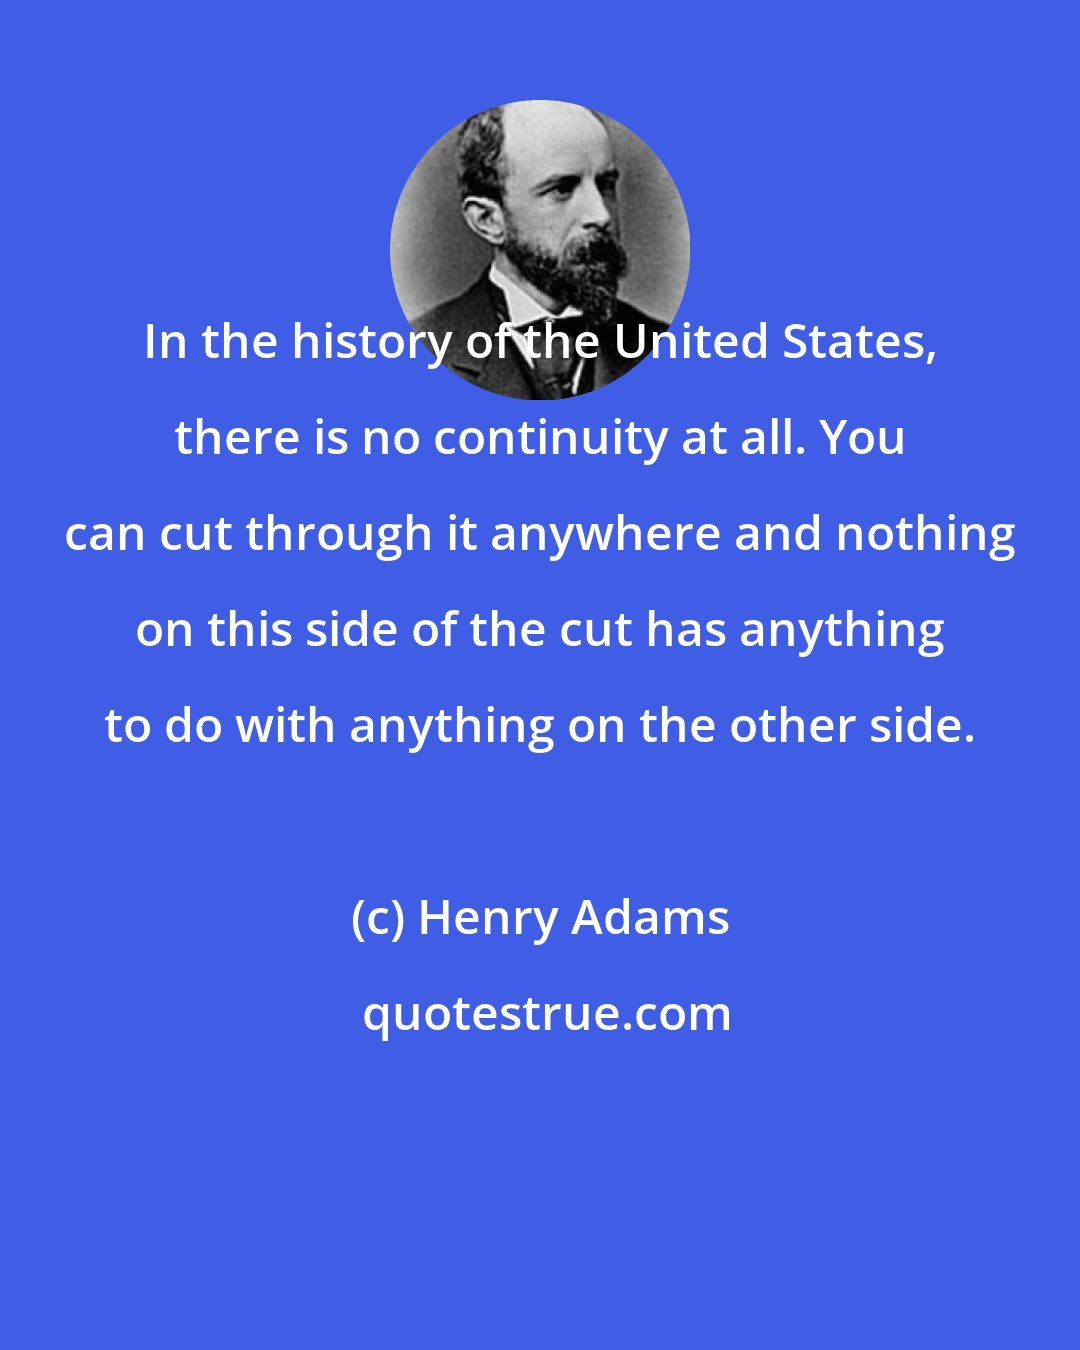 Henry Adams: In the history of the United States, there is no continuity at all. You can cut through it anywhere and nothing on this side of the cut has anything to do with anything on the other side.